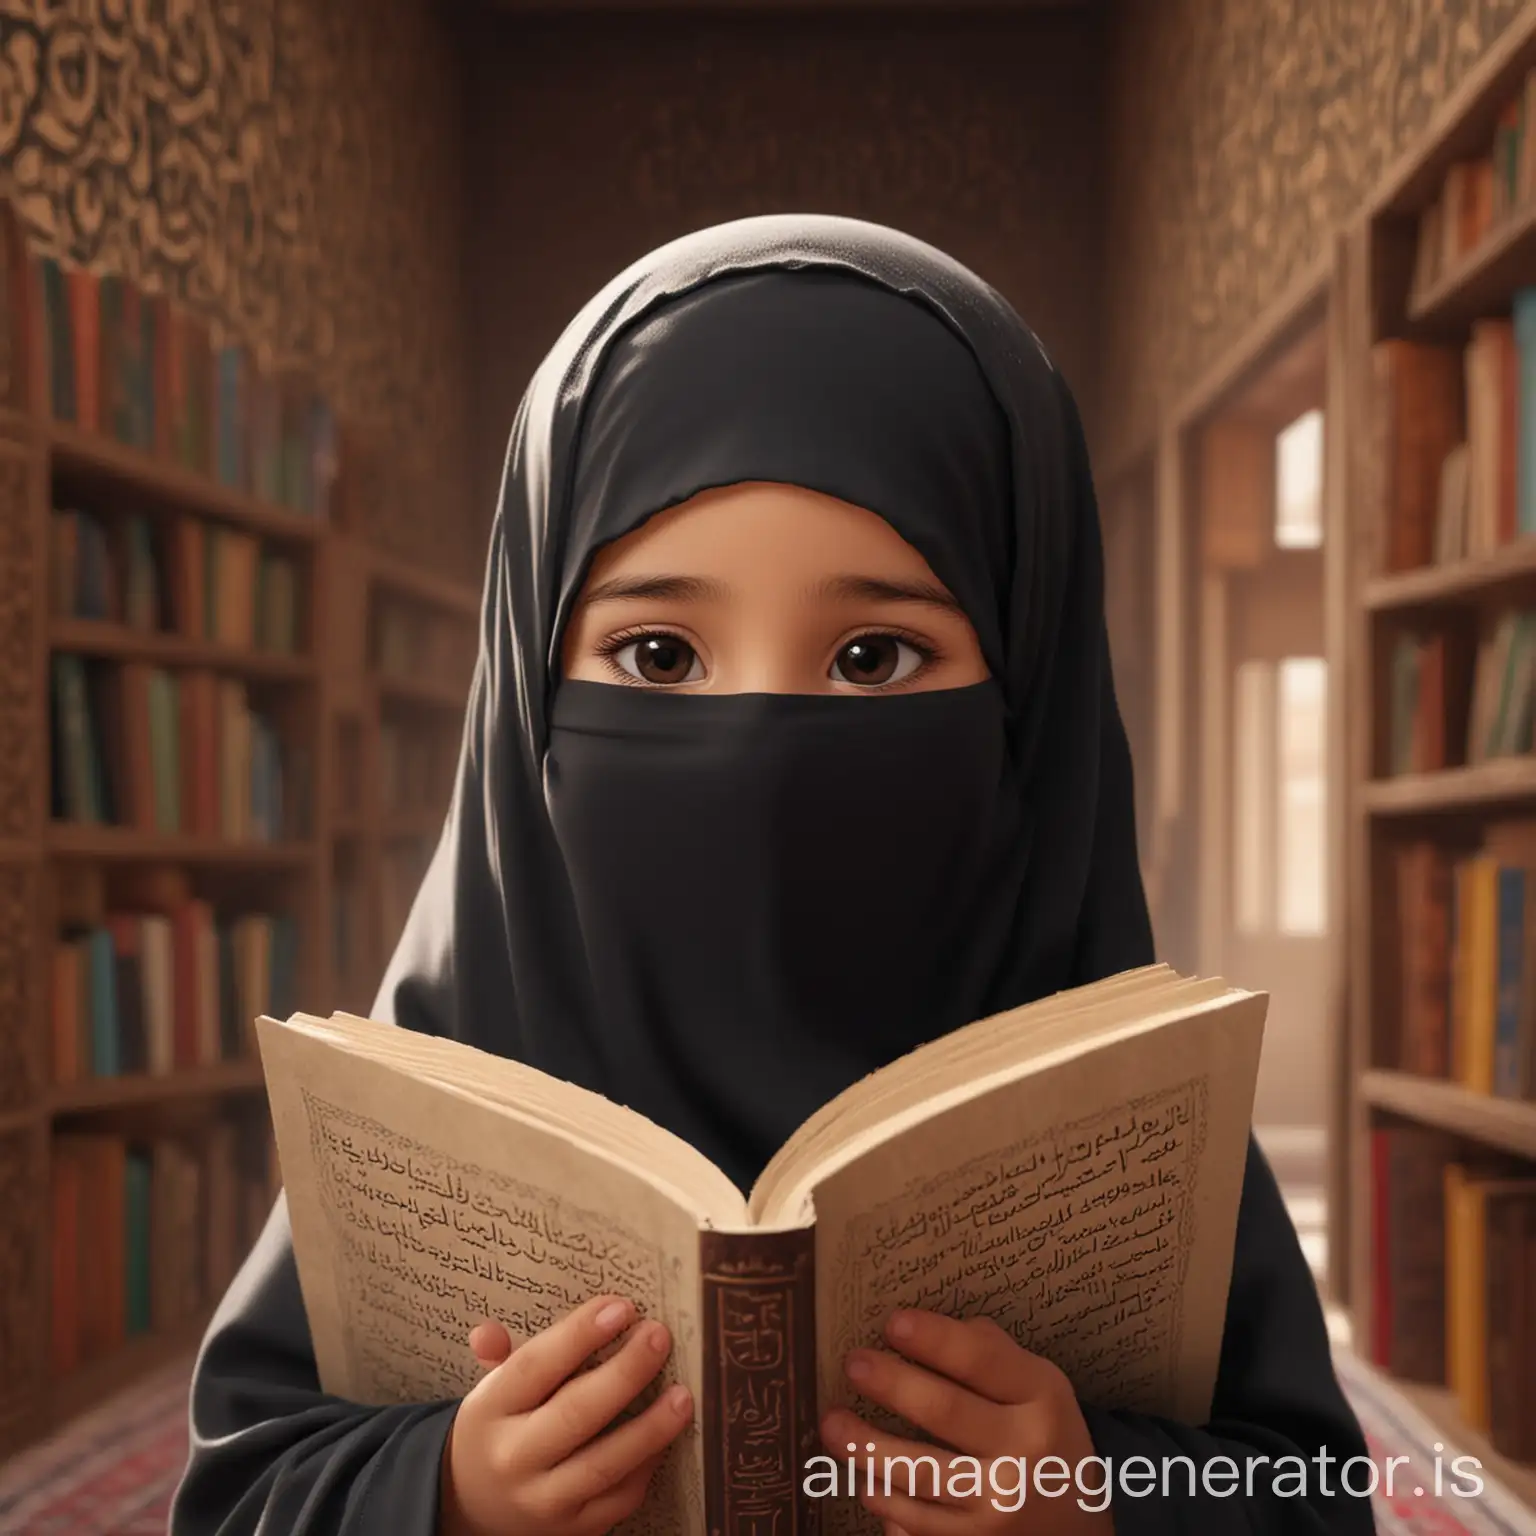 animation of a small child wearing a niqab and wearing a face covering in a closed room and depicting joy and Islamic nuances with a book background